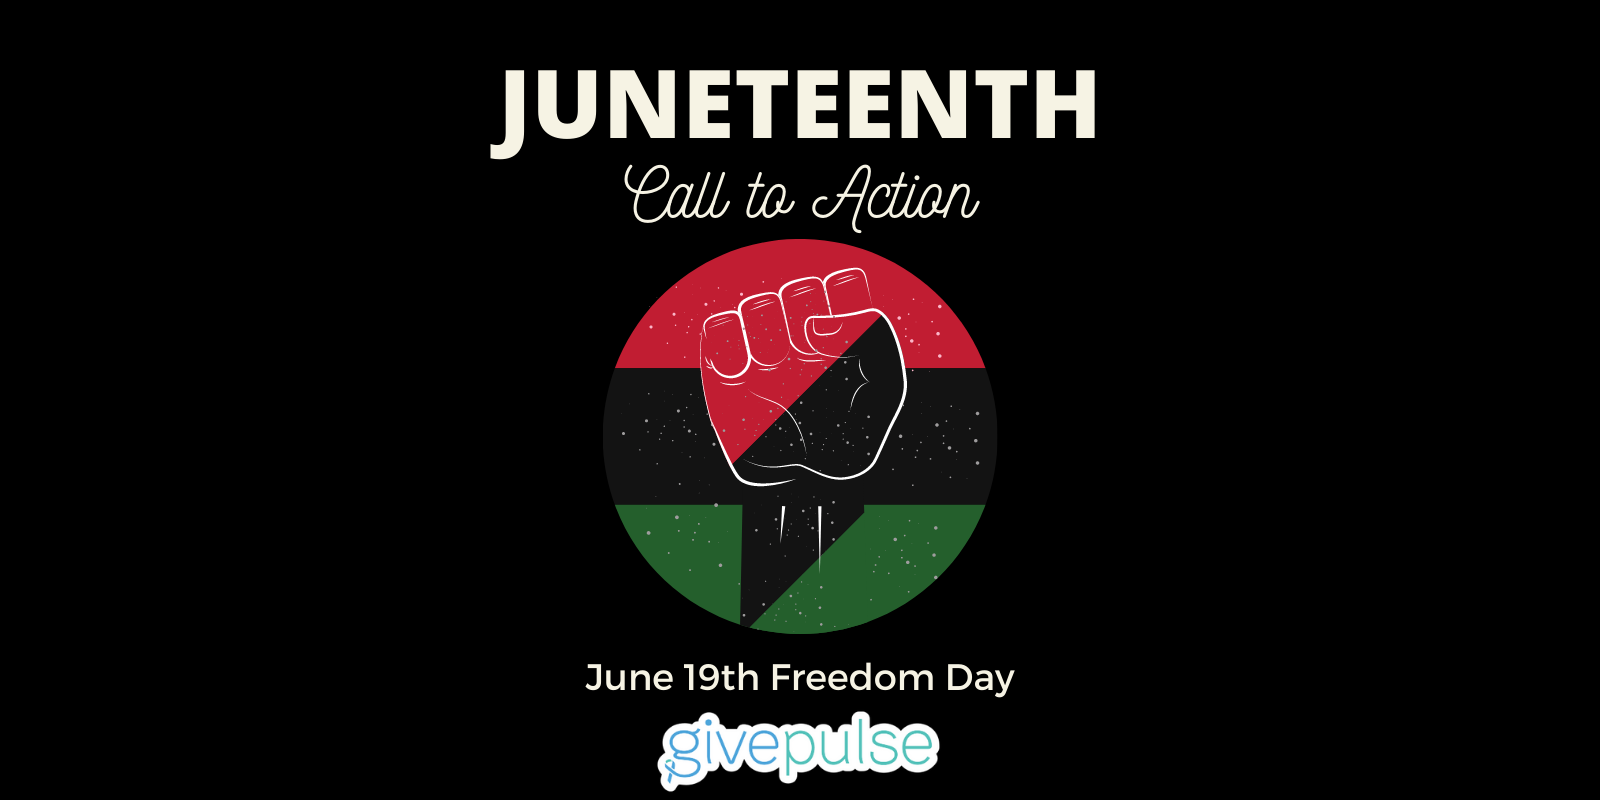 Juneteenth - Call to action with red back green circle with fist. June 19th Freedom Day 